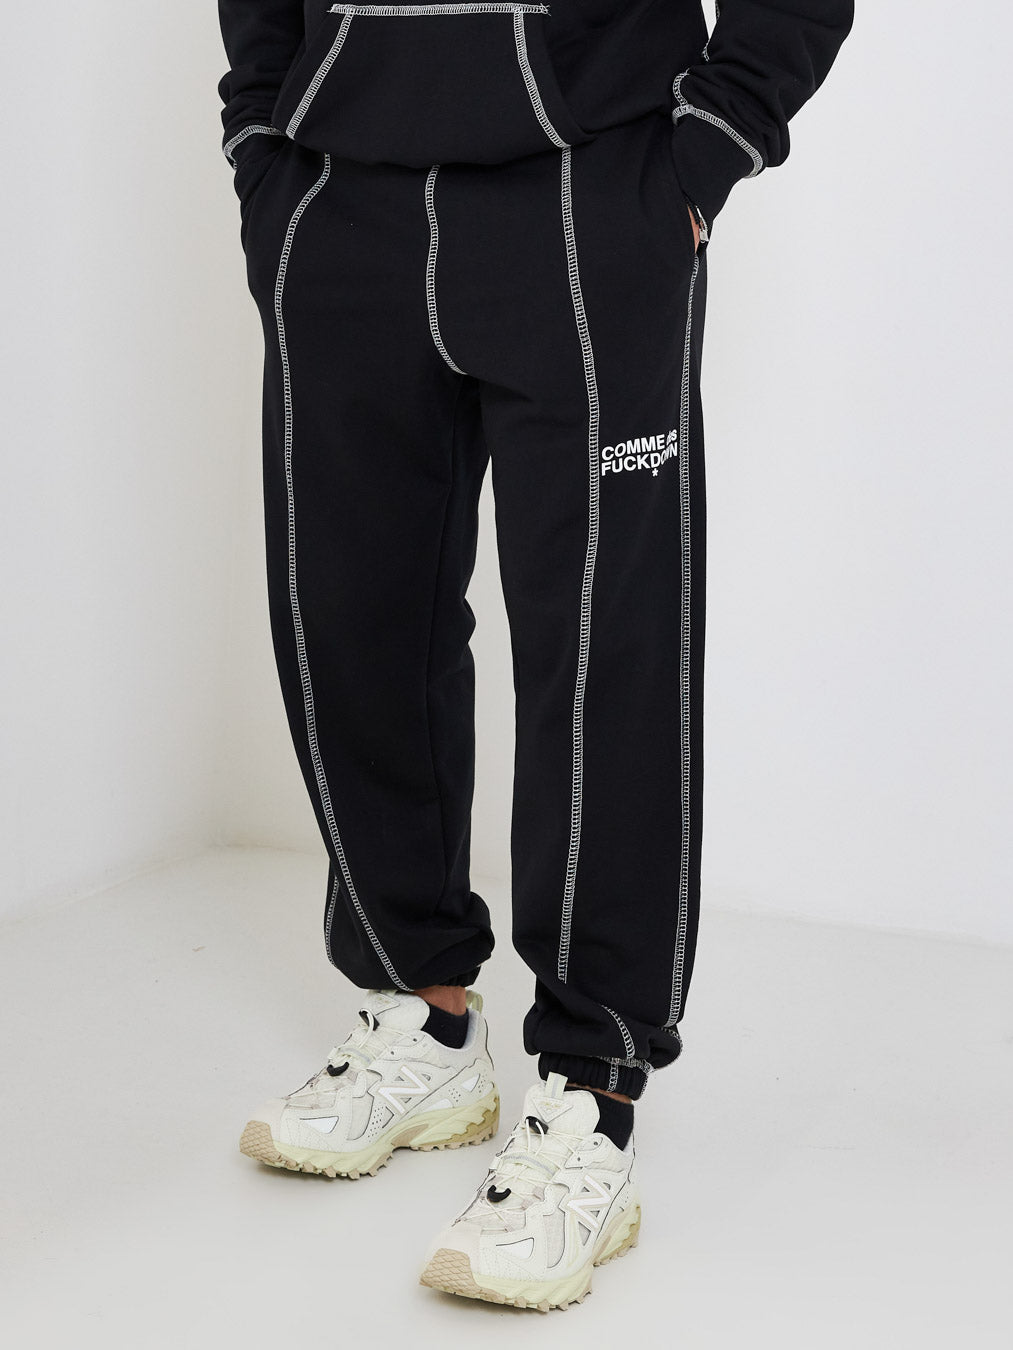 Comme Des Fuckdown black trousers with contrasting stitching